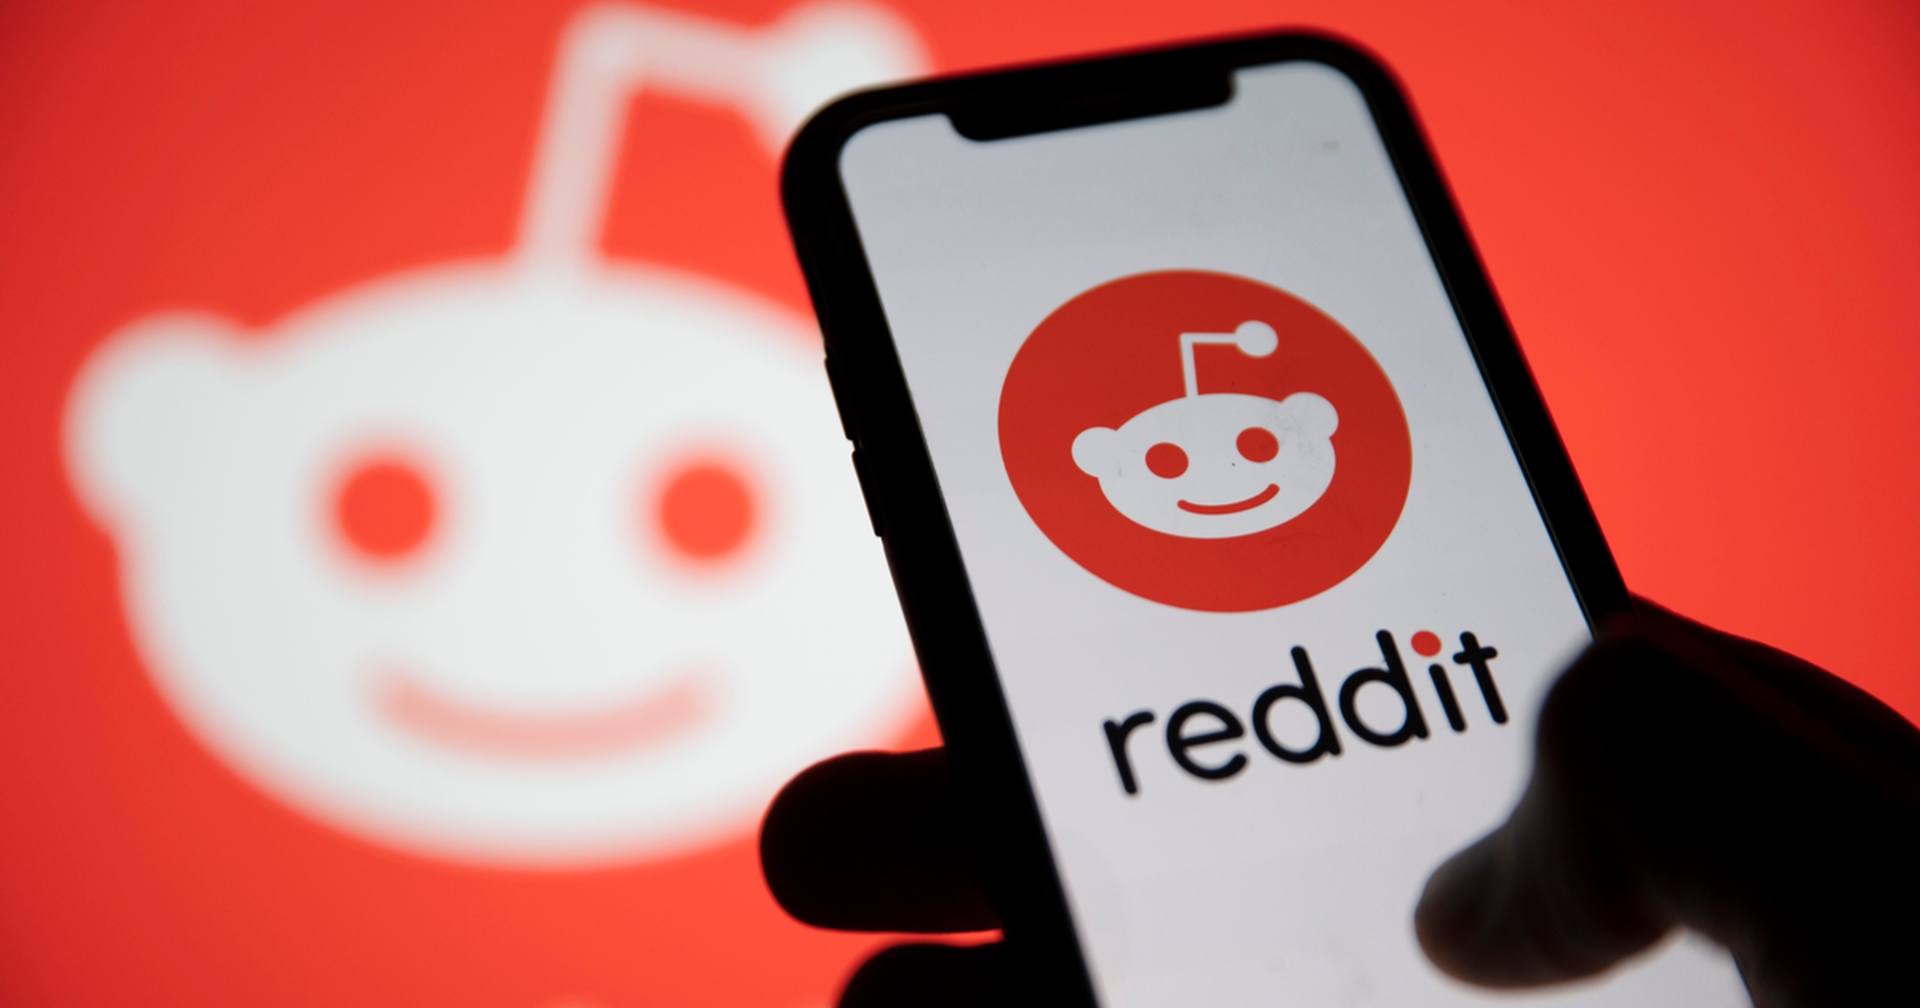 It is that time of the year when you get feedback from your favorite apps and Reddit Recap 2022 will provide you with all the information on what your year...